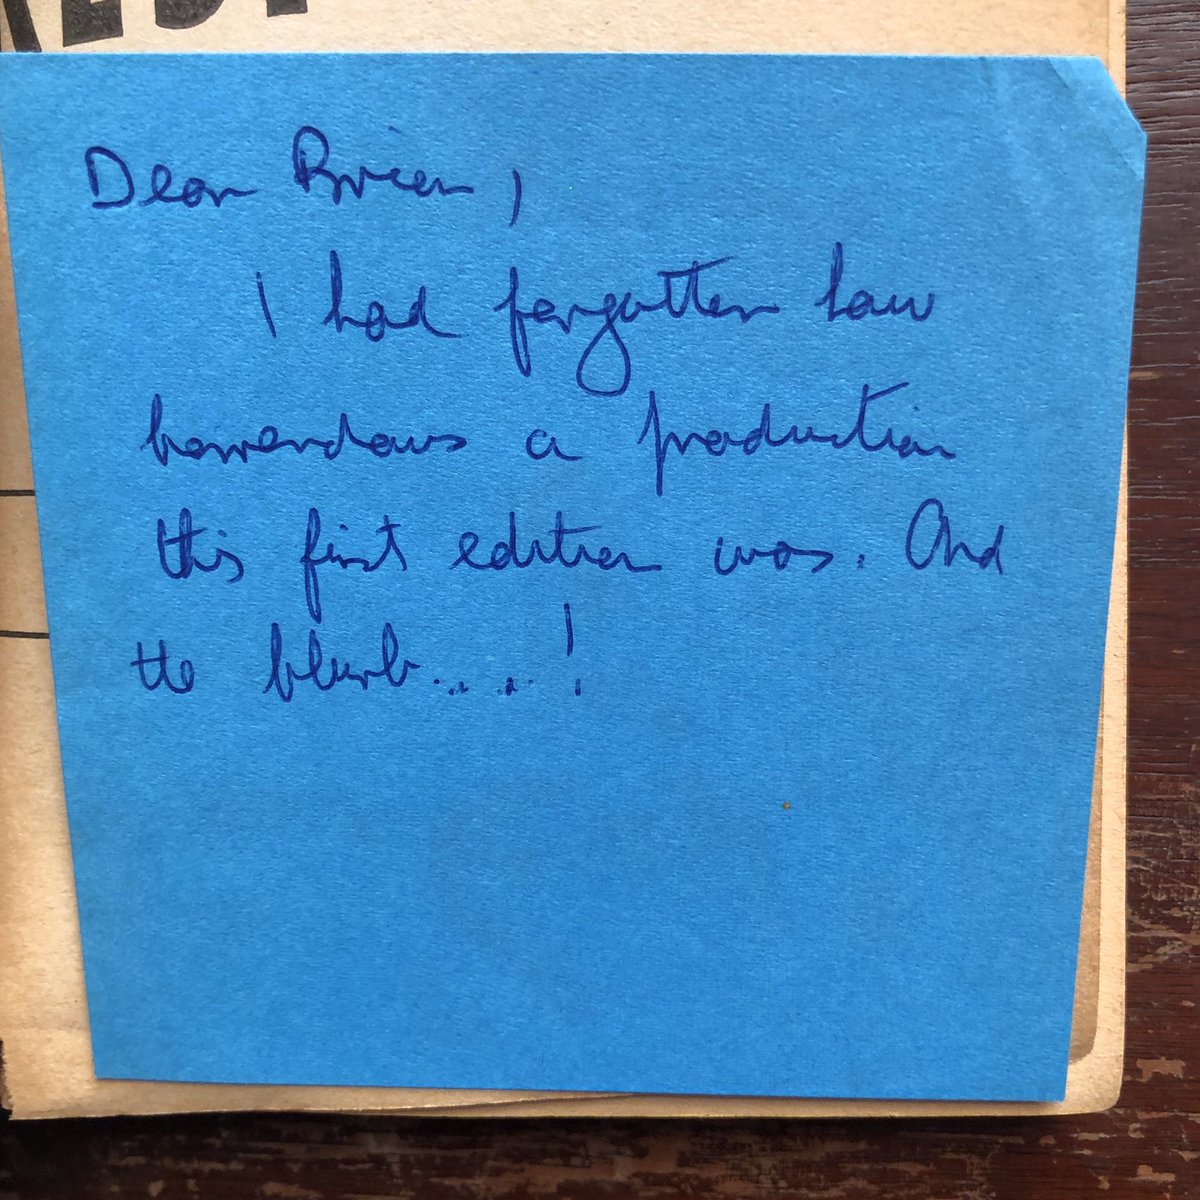 The most special Beacon I have is this, which includes an amazing inscription (“slobber slobber”) from Brian Aldiss to author and bibliophile John Baxter and a much later post-it from John back to Brian.